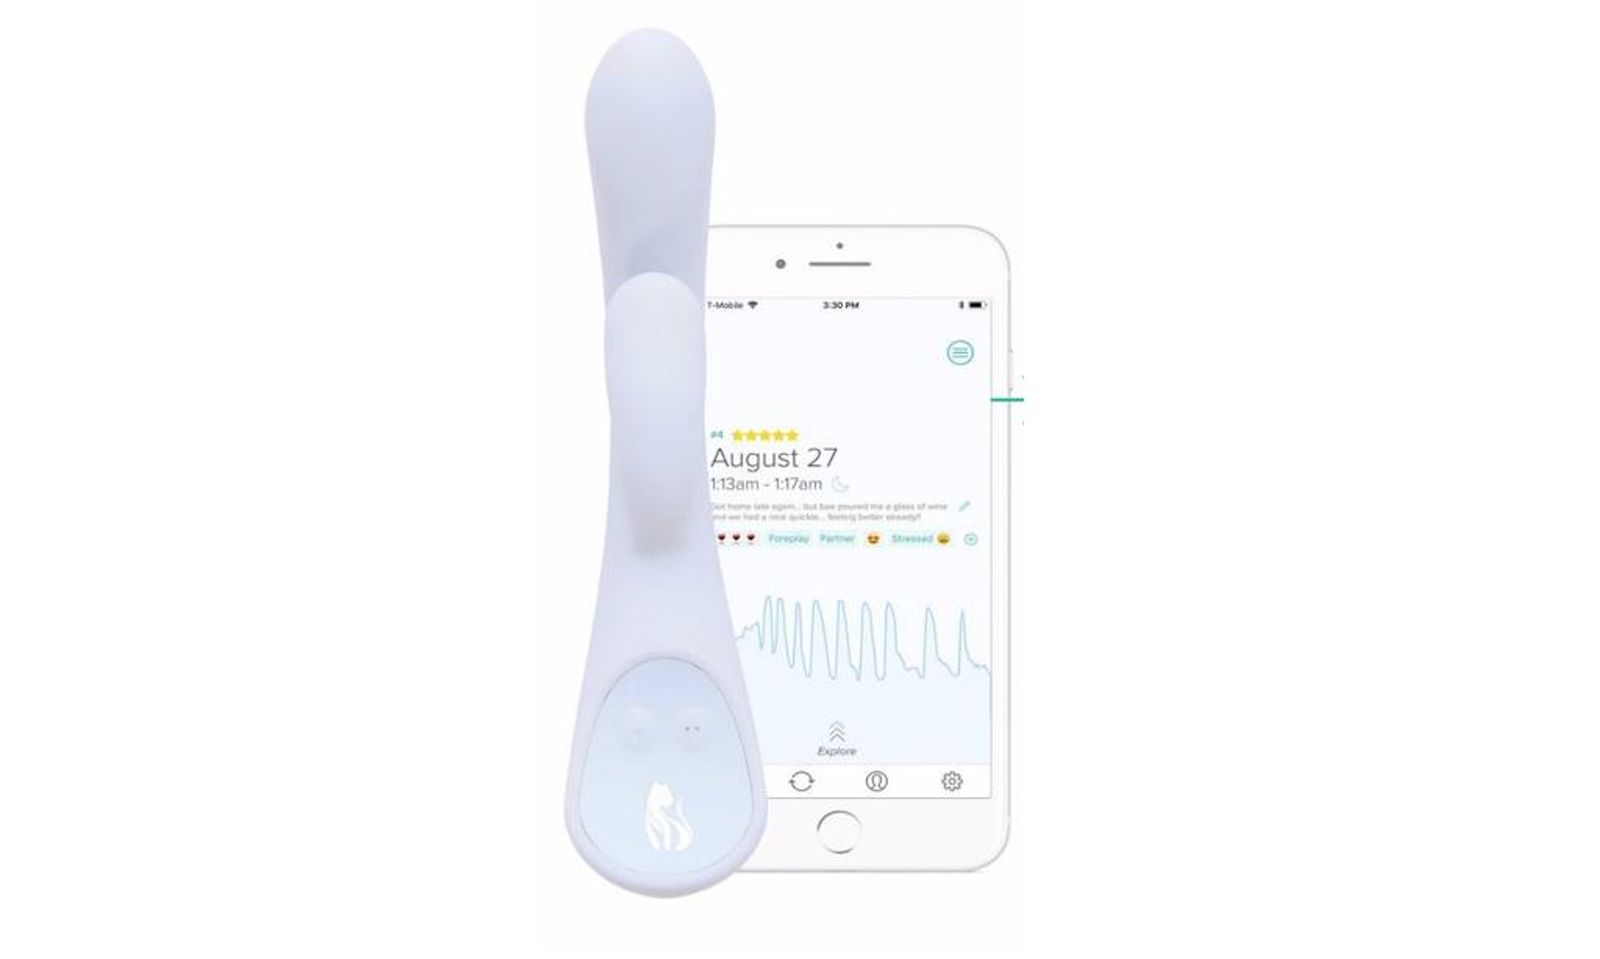 Year After Osé Snub, CES May Give Award to Data-Based Vibrator